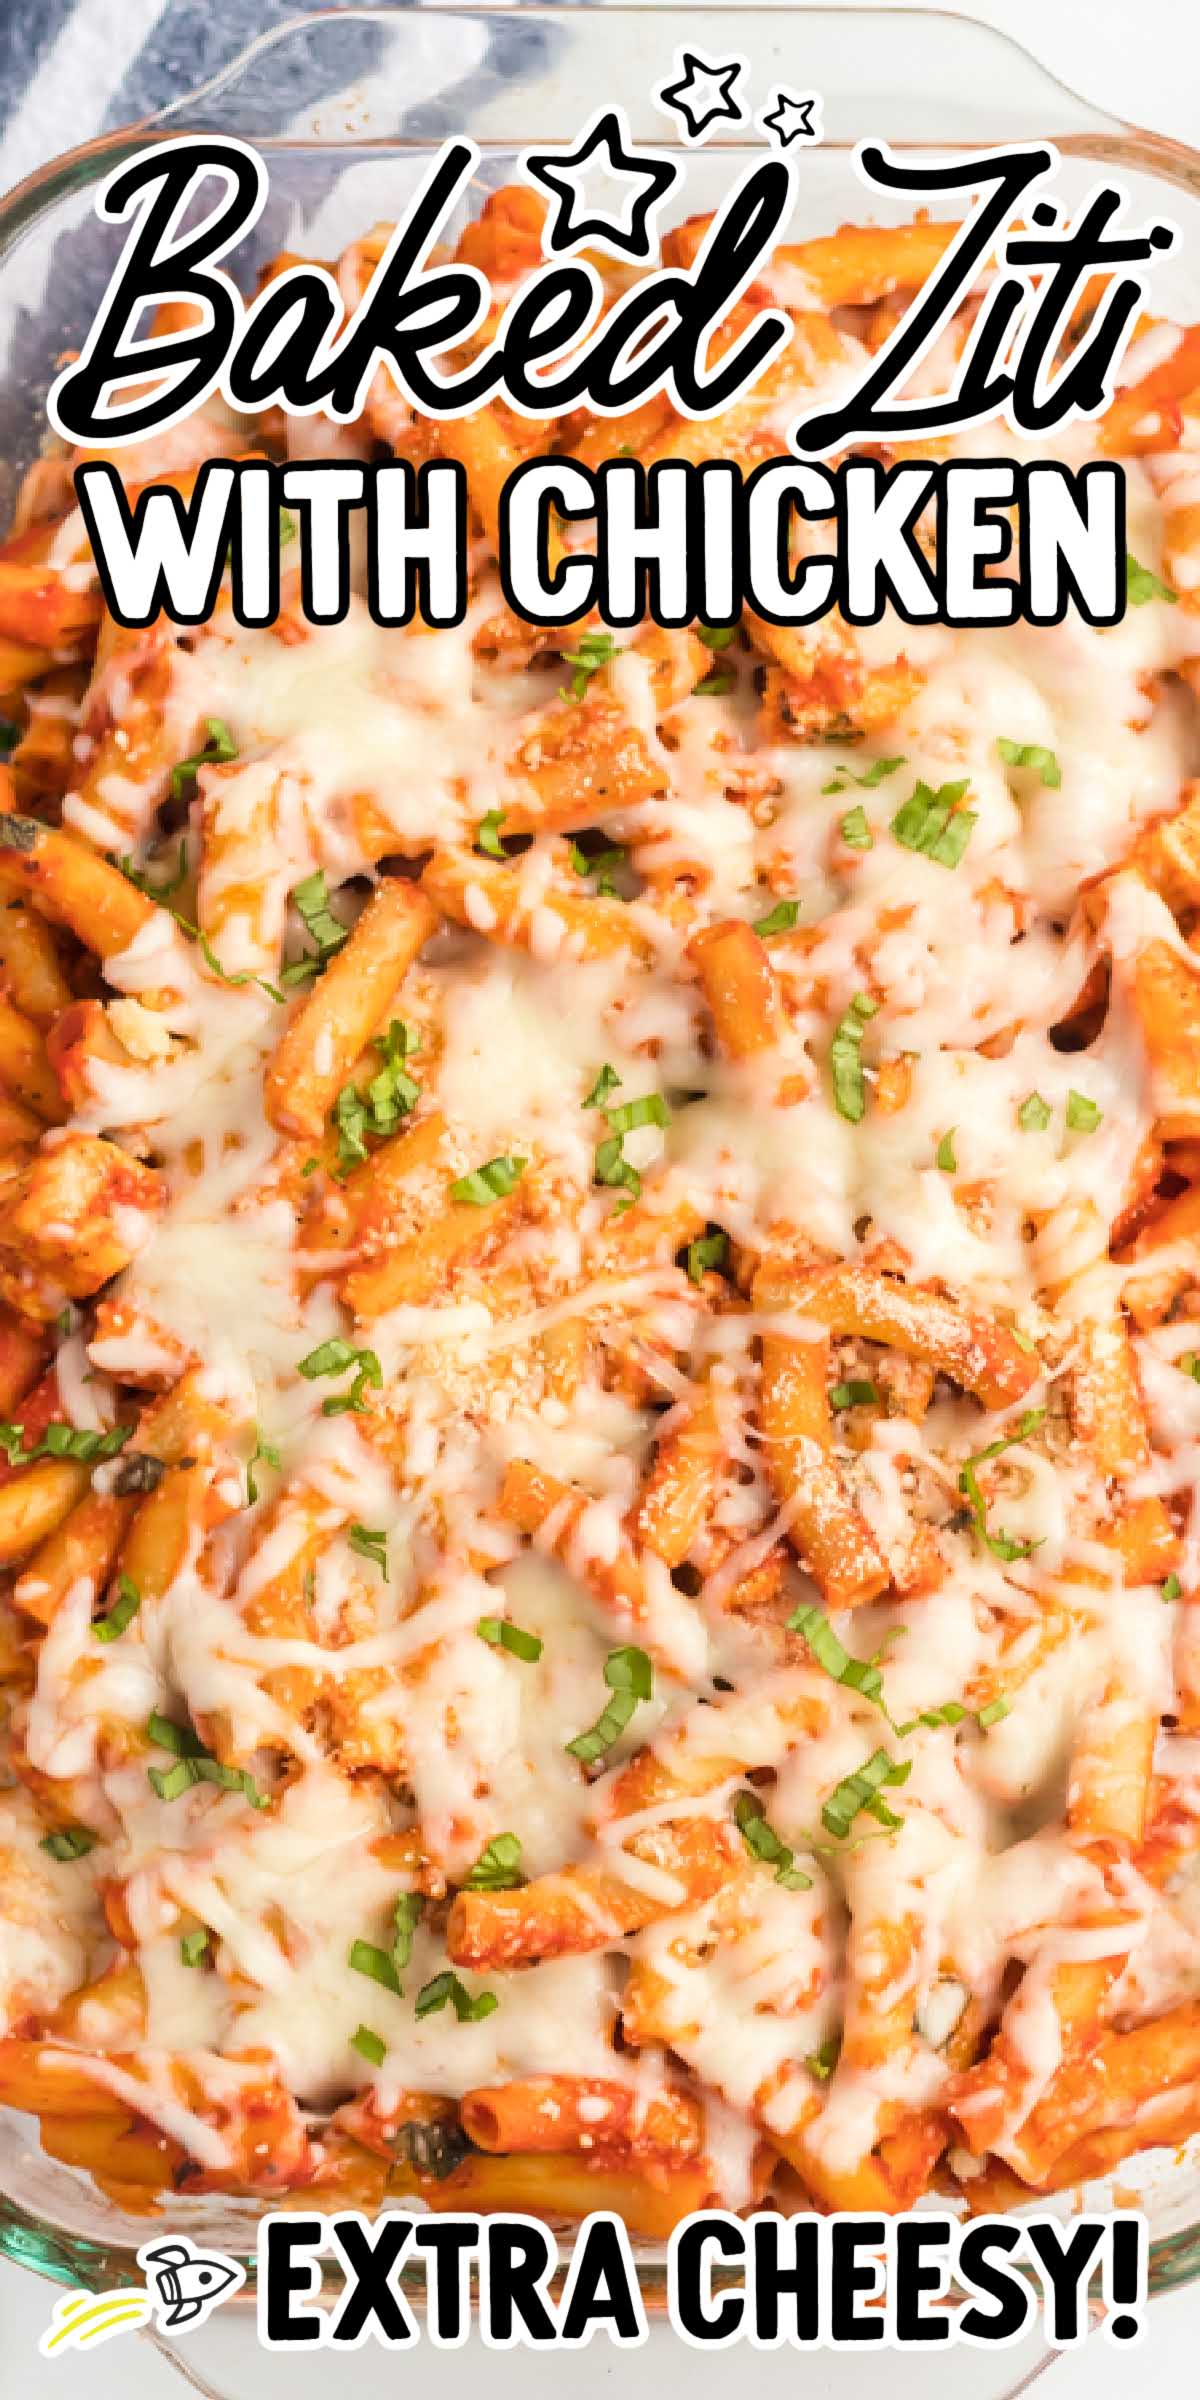 Baked Ziti With Chicken - Spaceships and Laser Beams